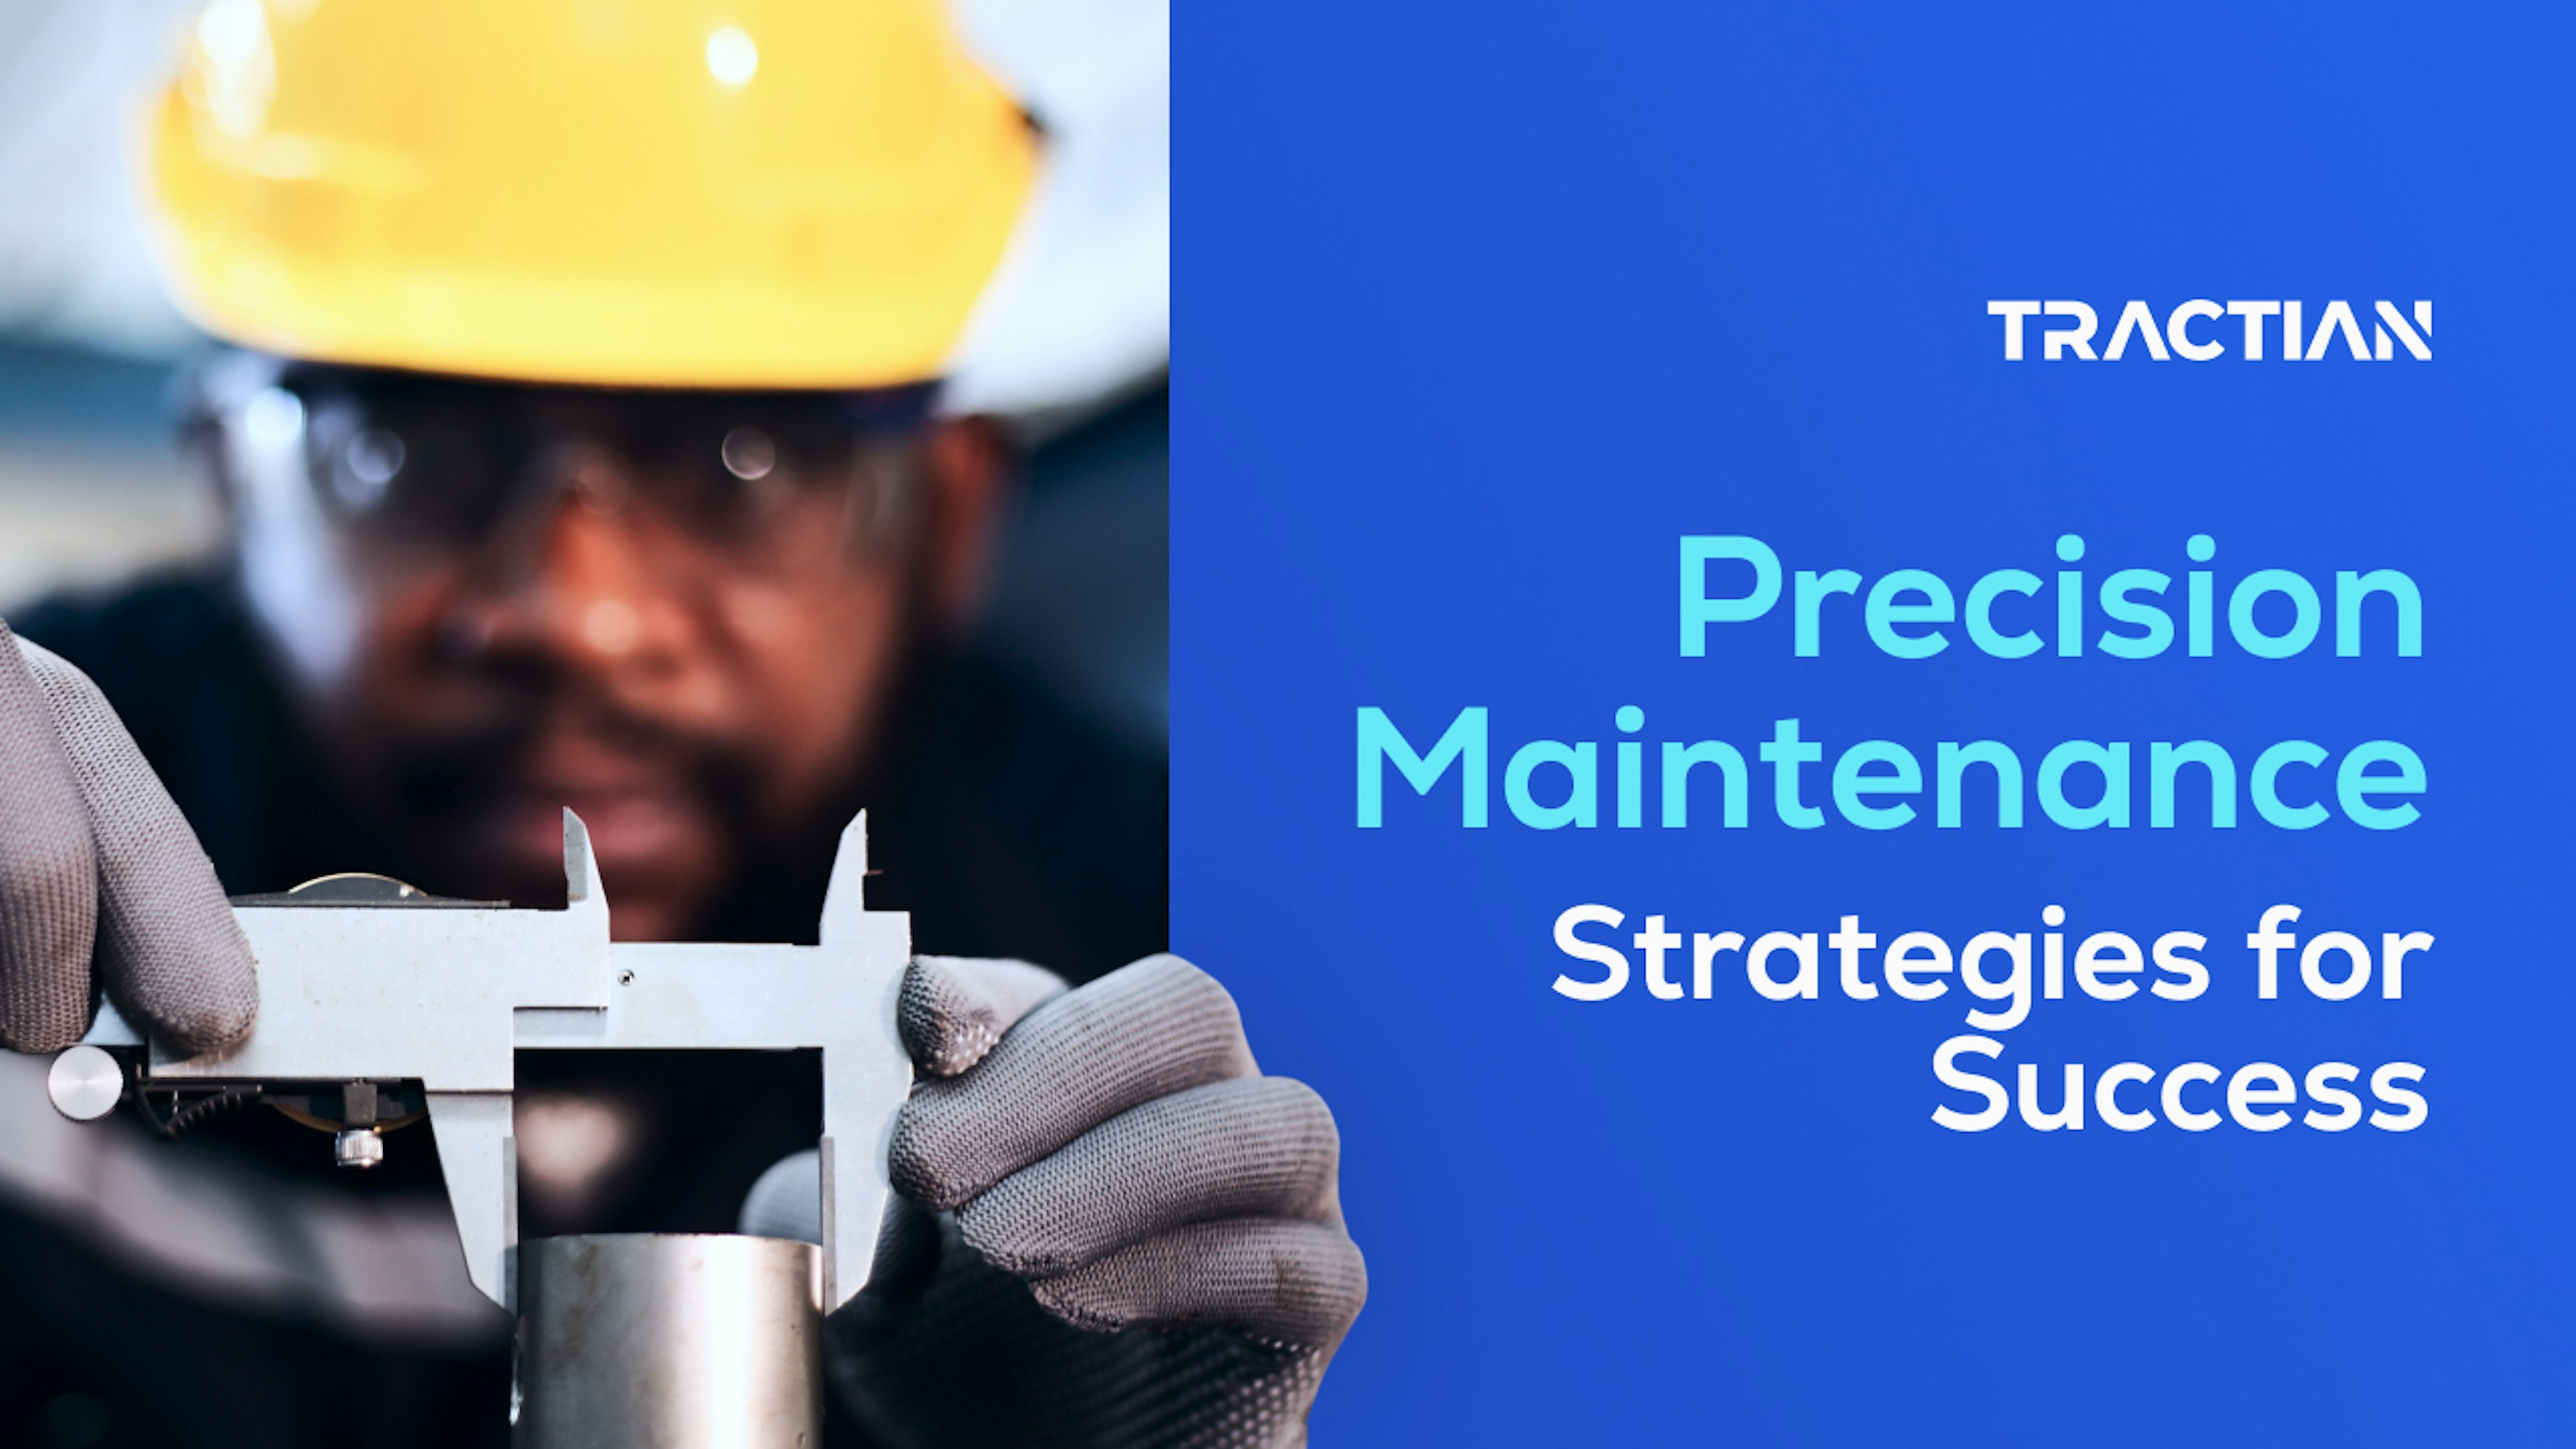 Precision Maintenance: Empowering Technicians with AI Insights